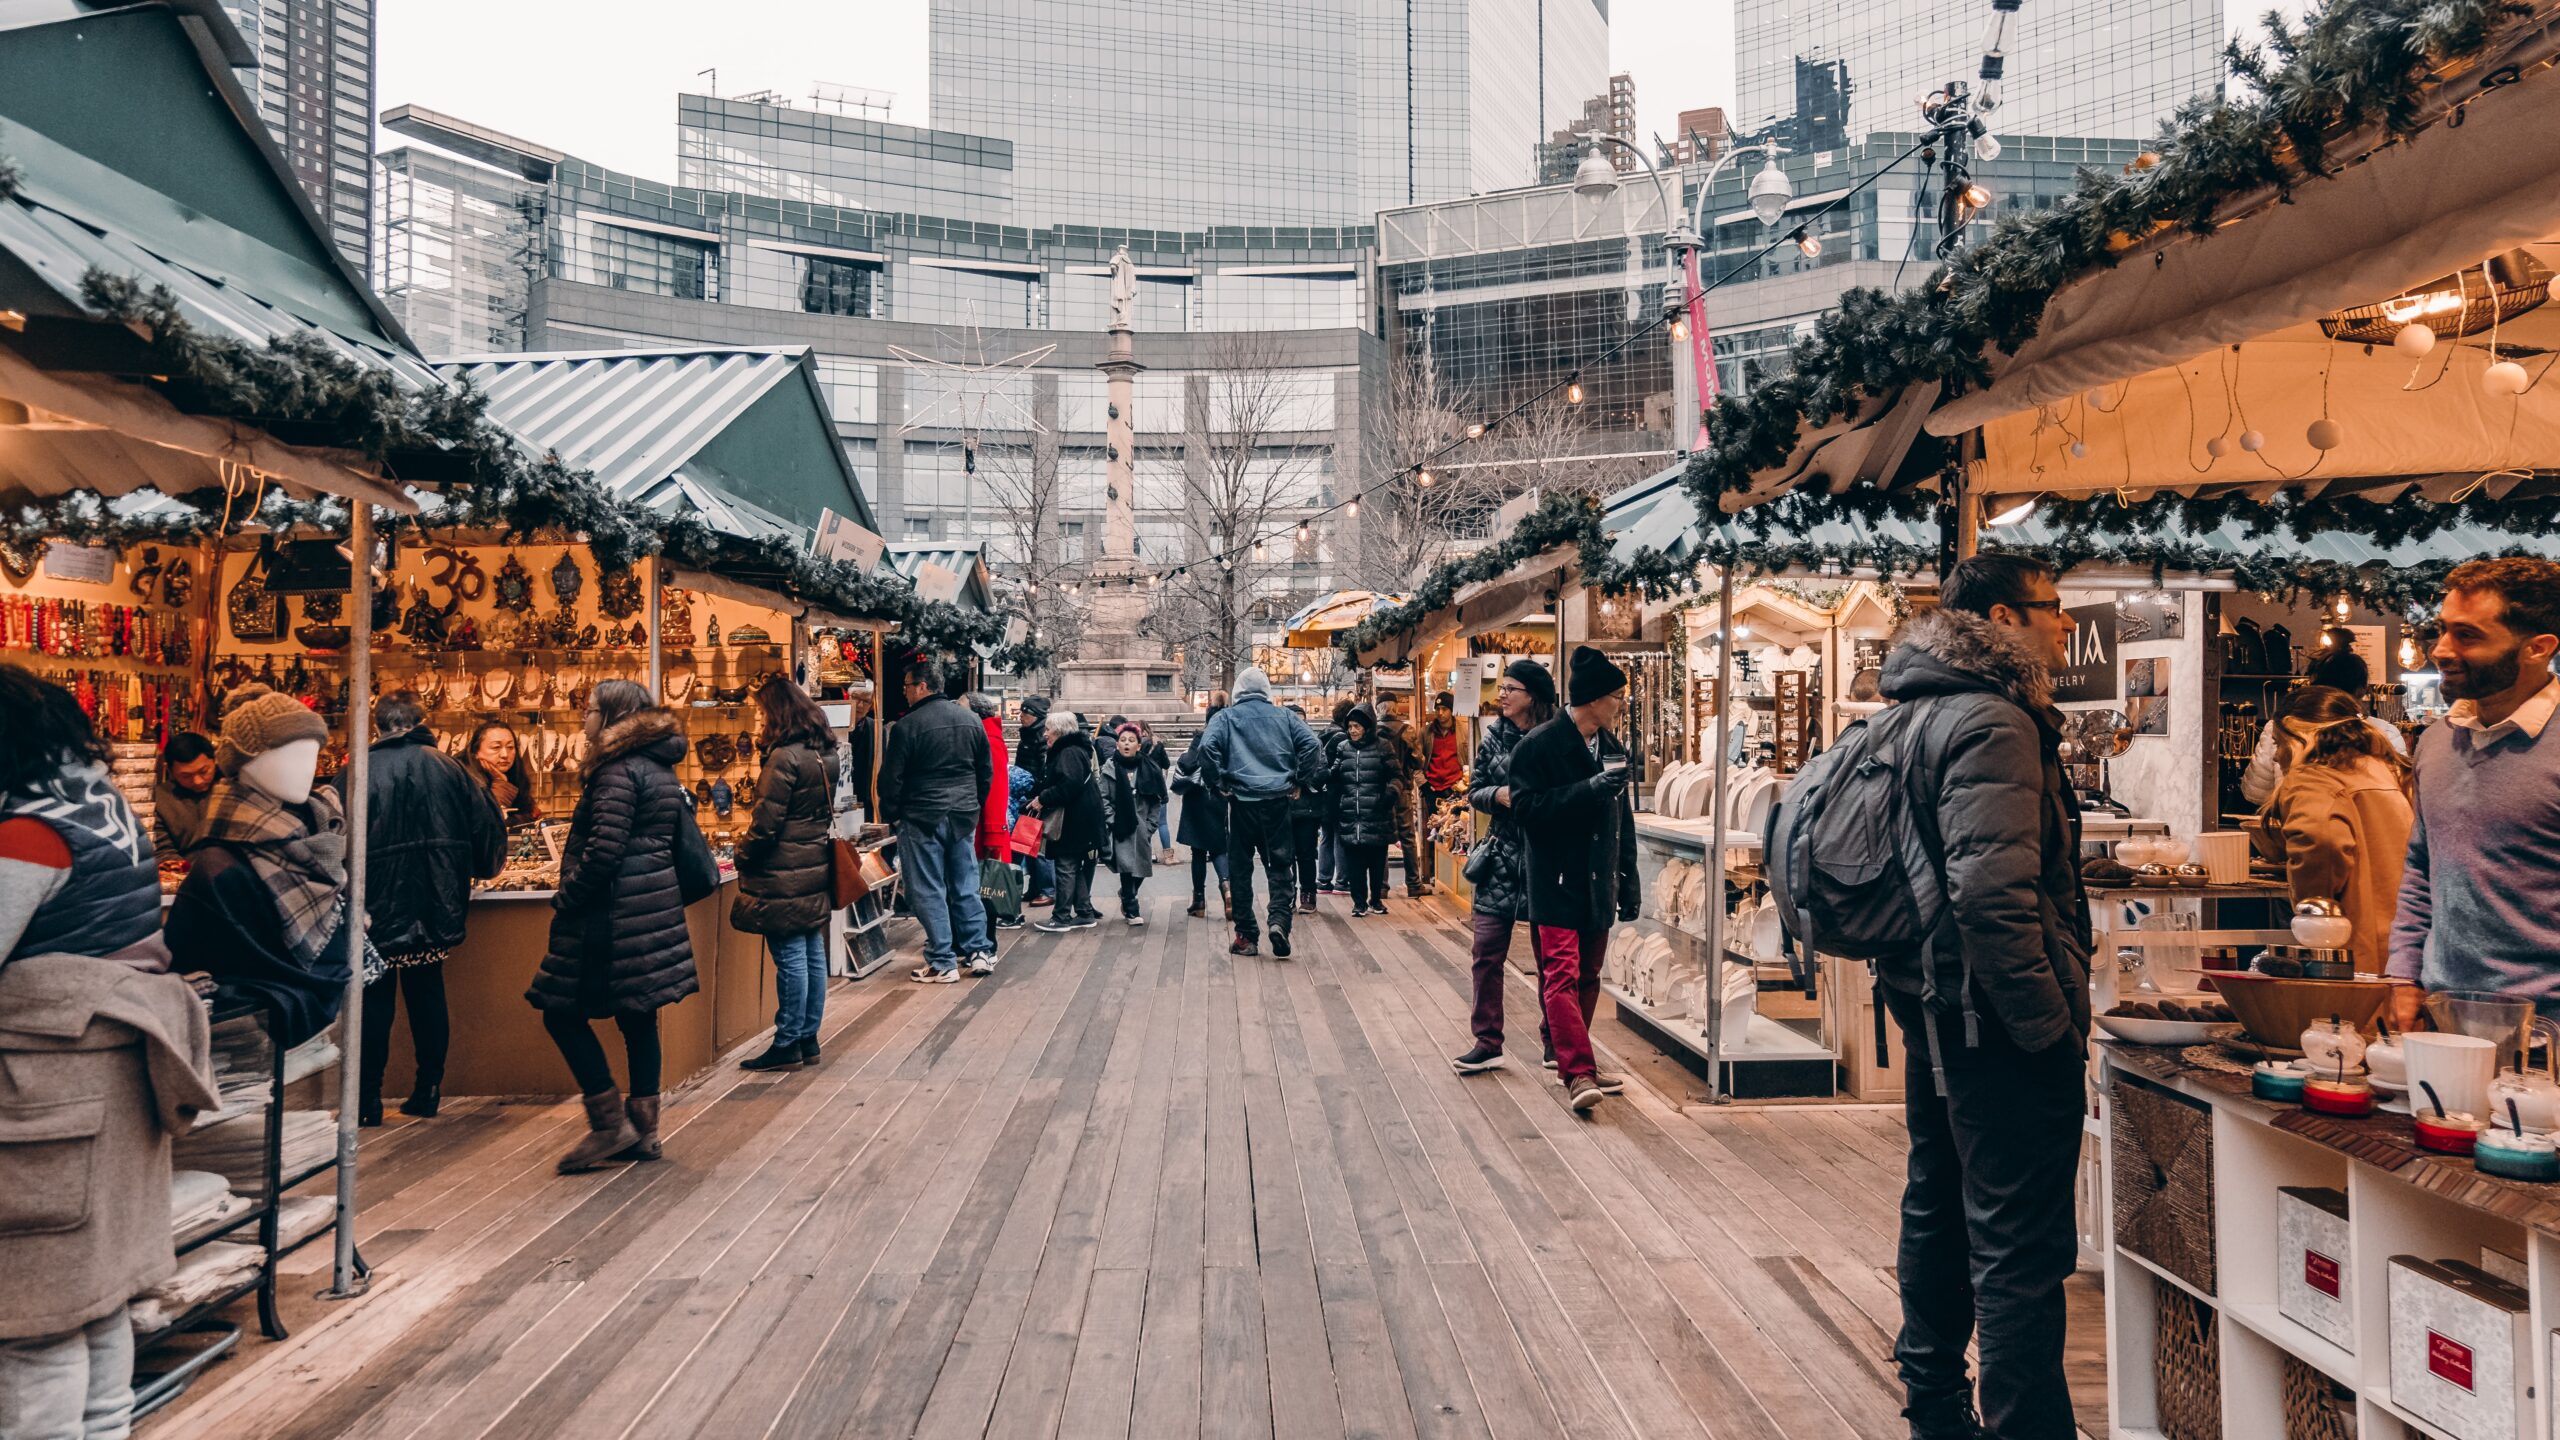 These NYC holiday markets are the best near Christmas time. 
Pictured: the Bryant Park Winter Village with visitors perusing the shops 